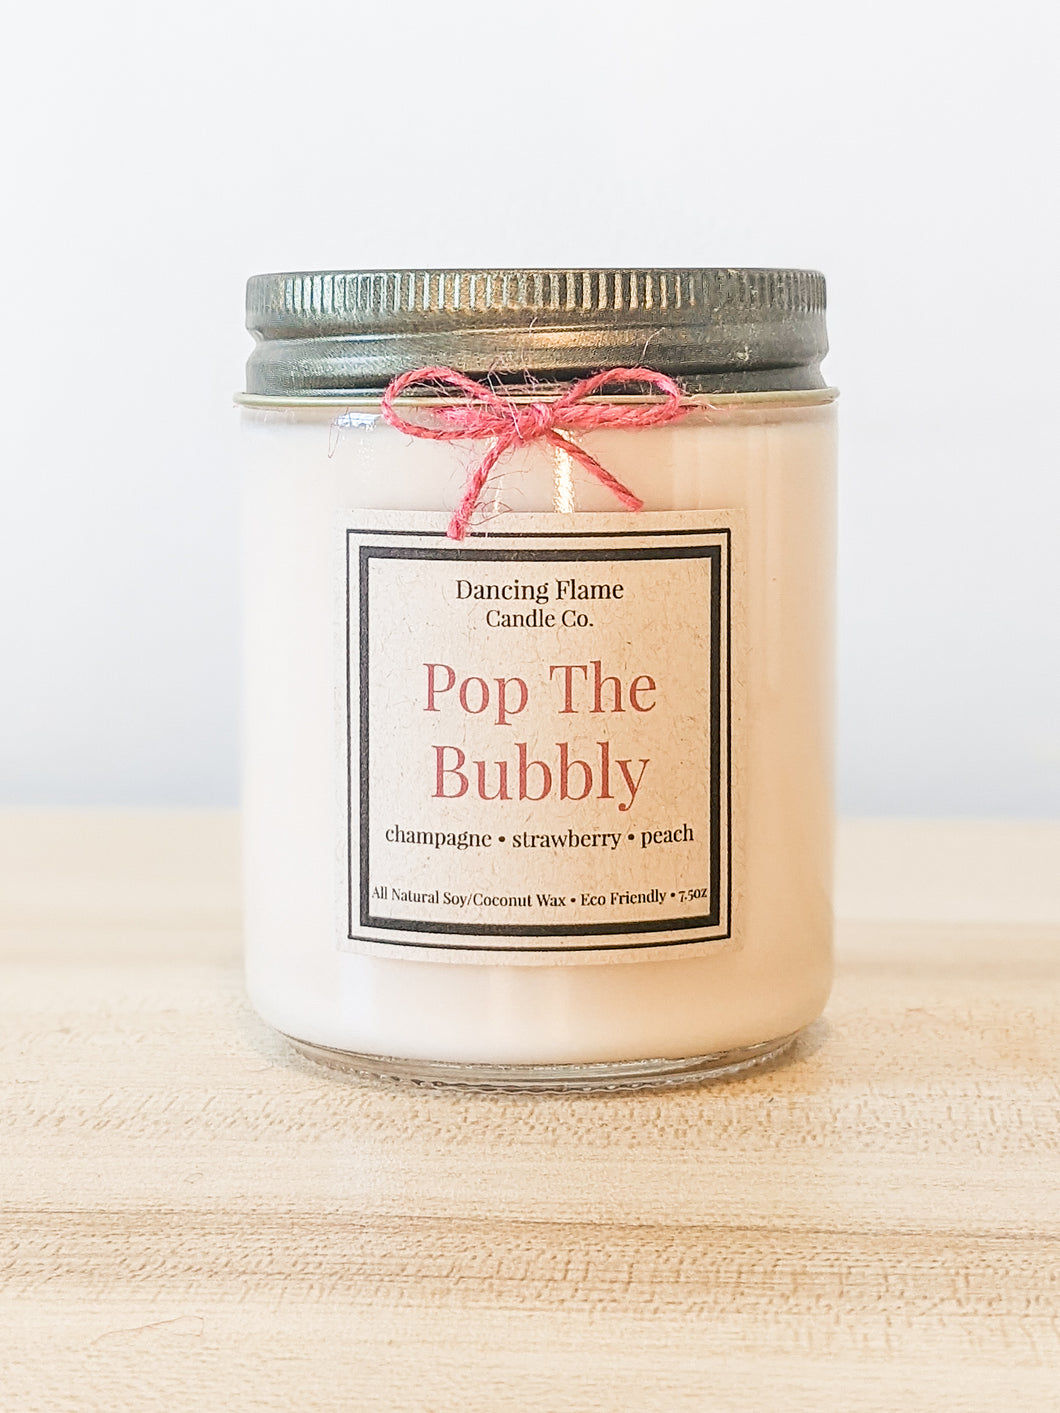 Pop The Bubbly Soy/Coconut Wax Candle